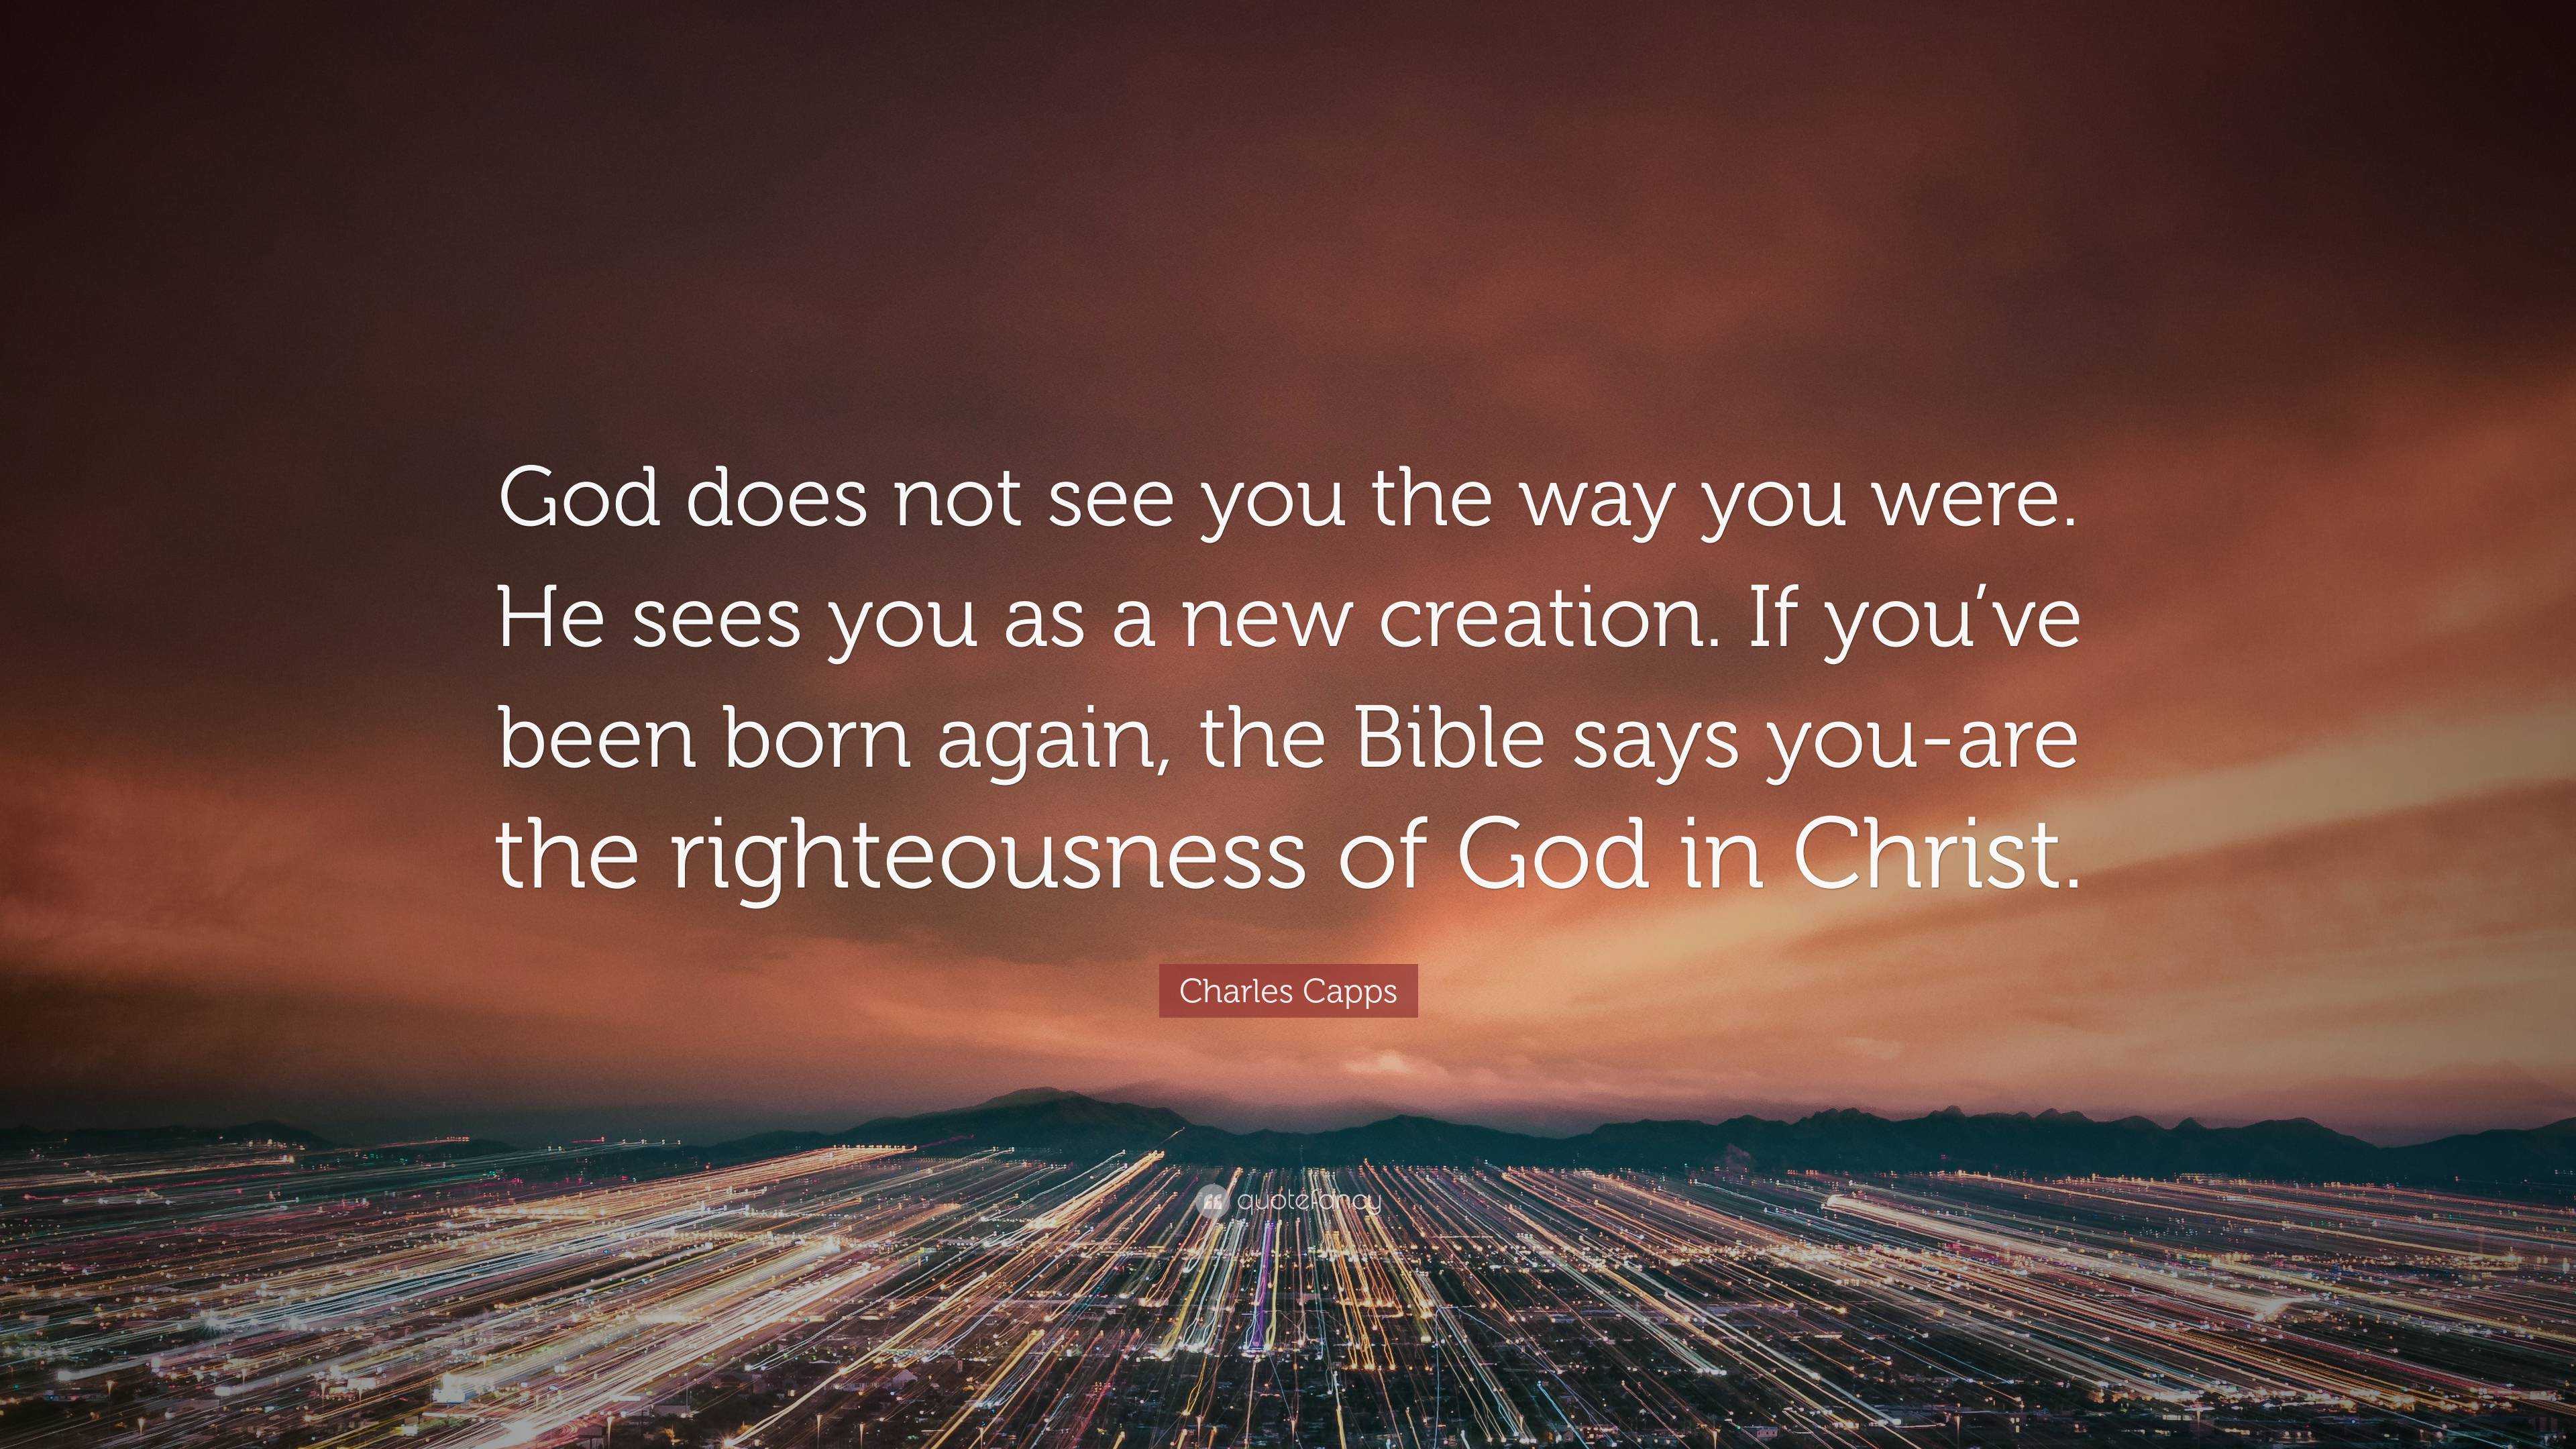 Charles Capps Quote: “God does not see you the way you were. He sees ...